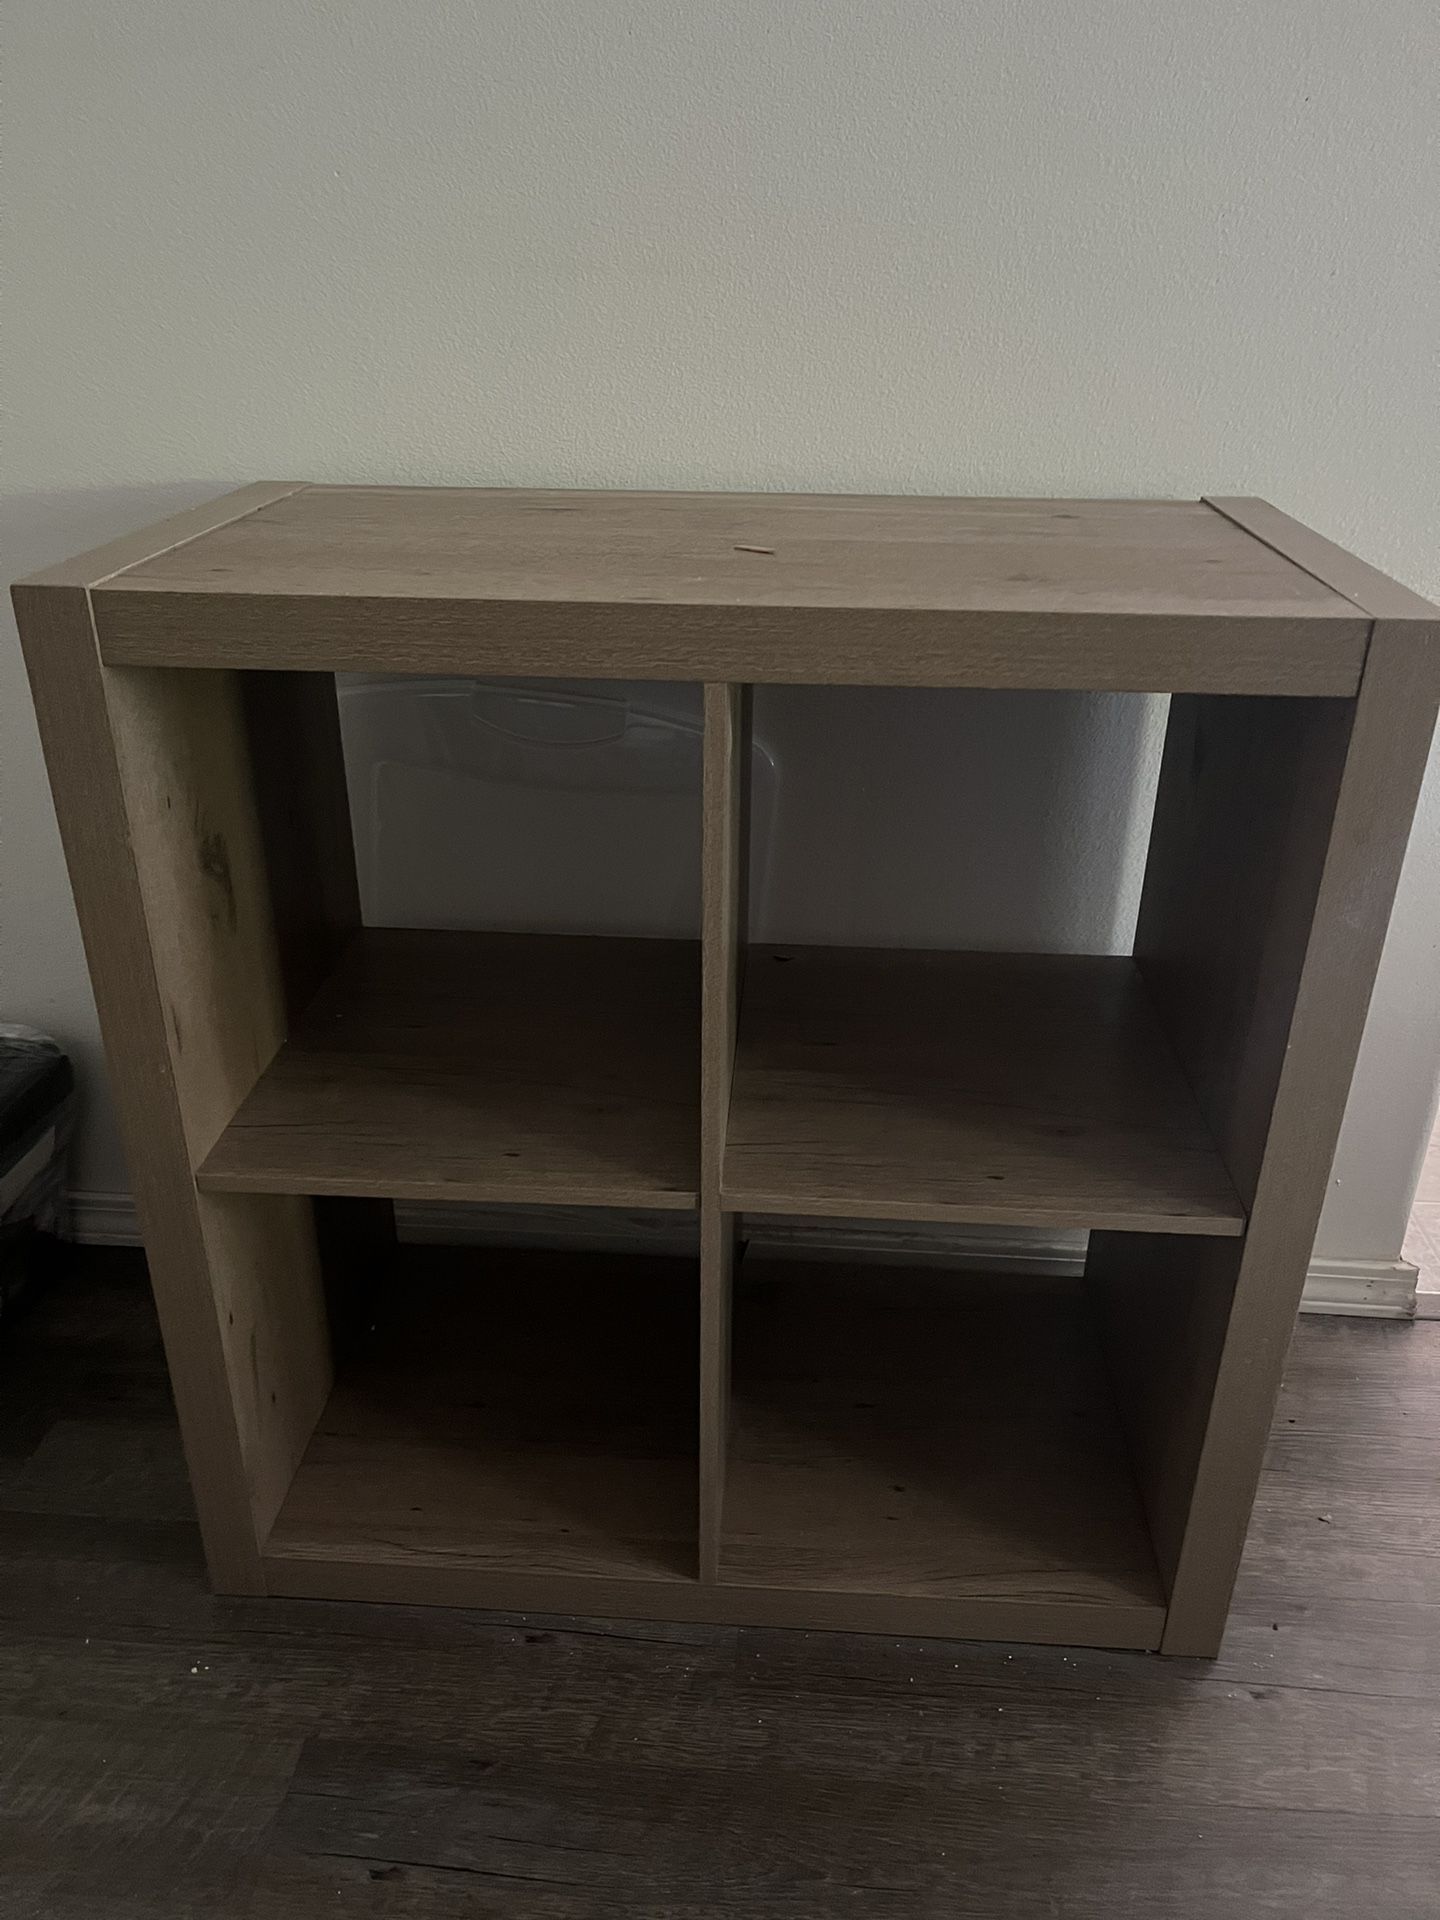 Table with shelves